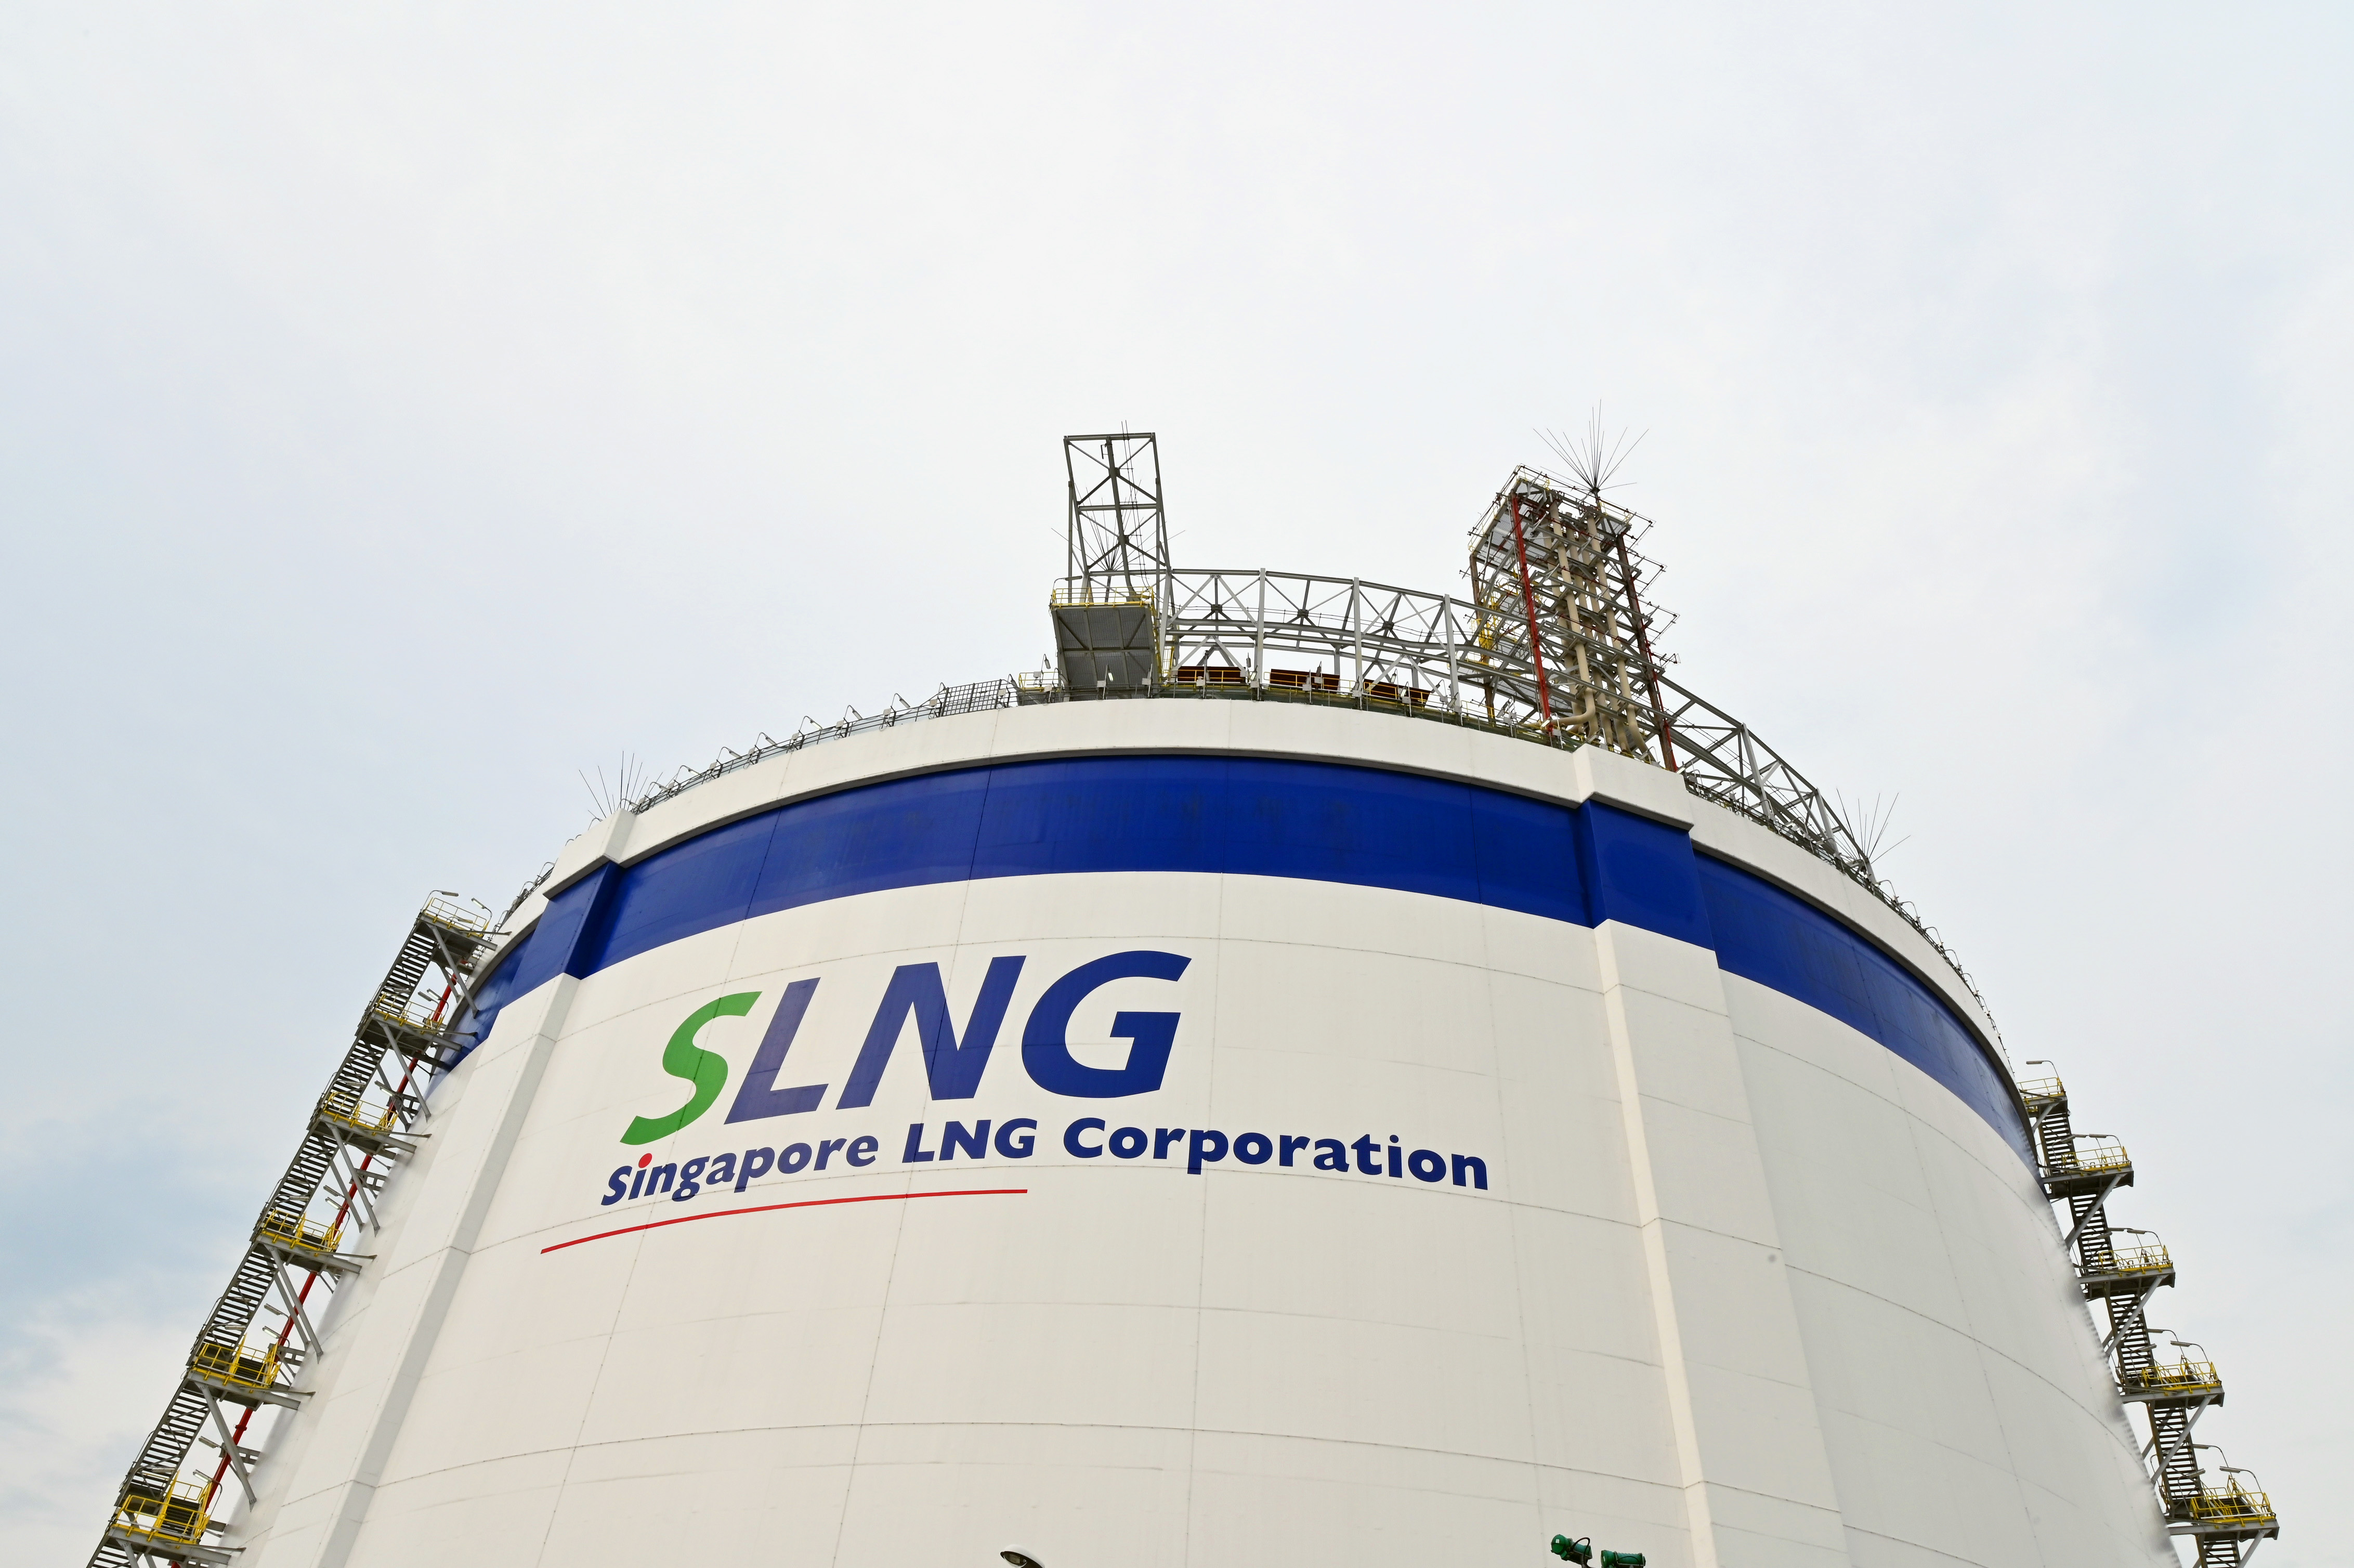 Pavilion Energy And SLNG Sign First Mid-Term Agreement For Storage And Reload